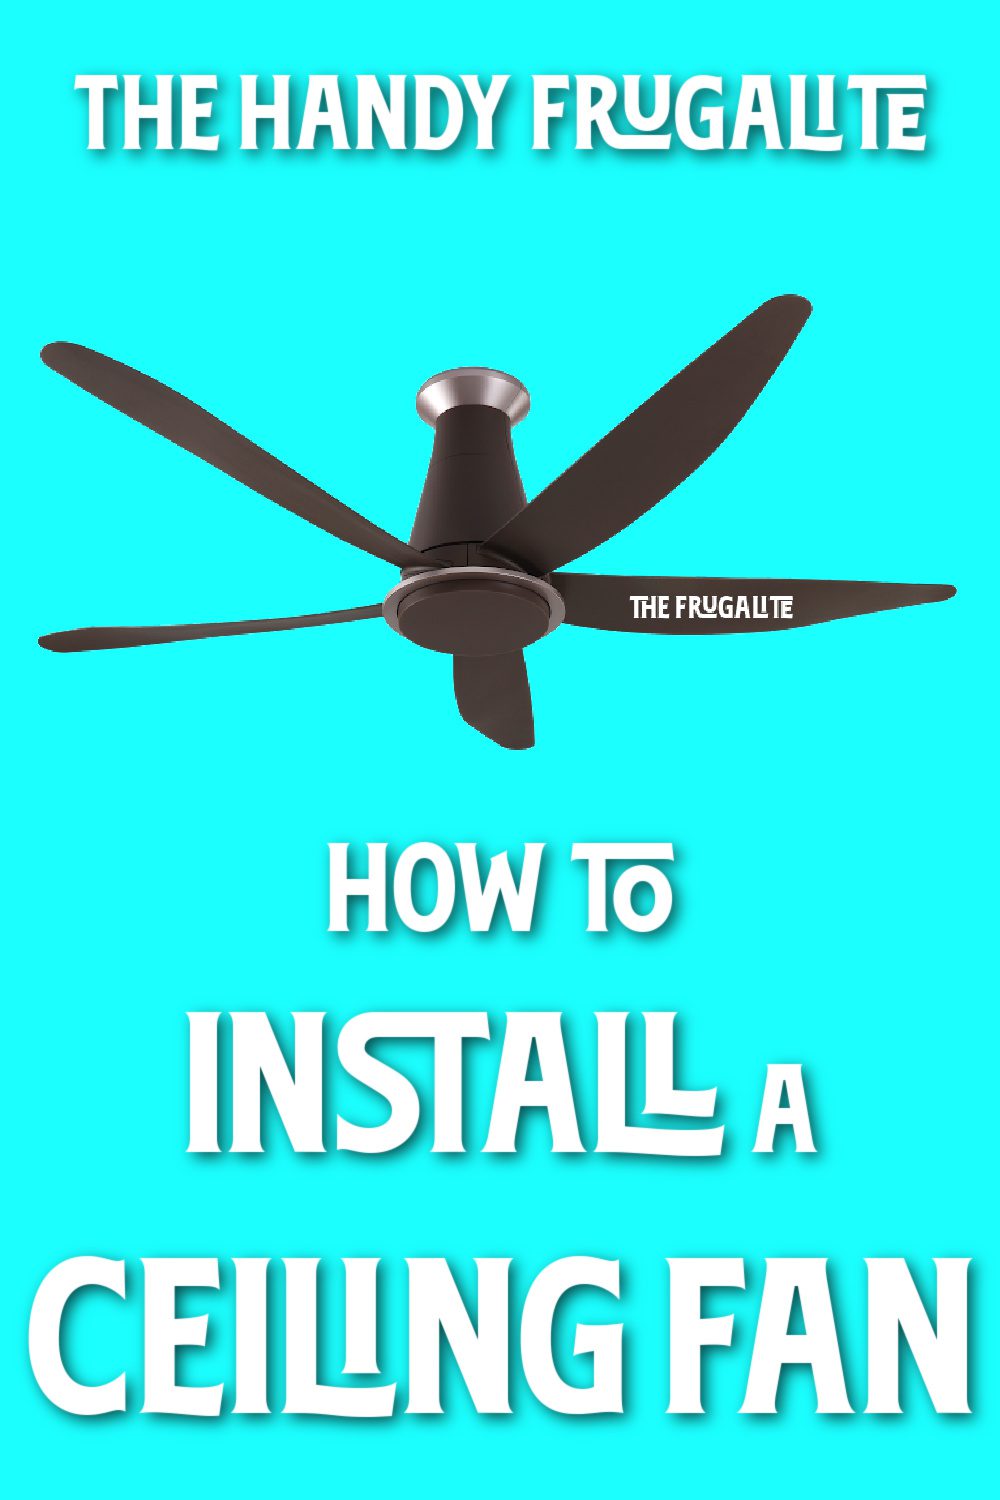 How to Install a Ceiling Fan: The Handy Frugalite